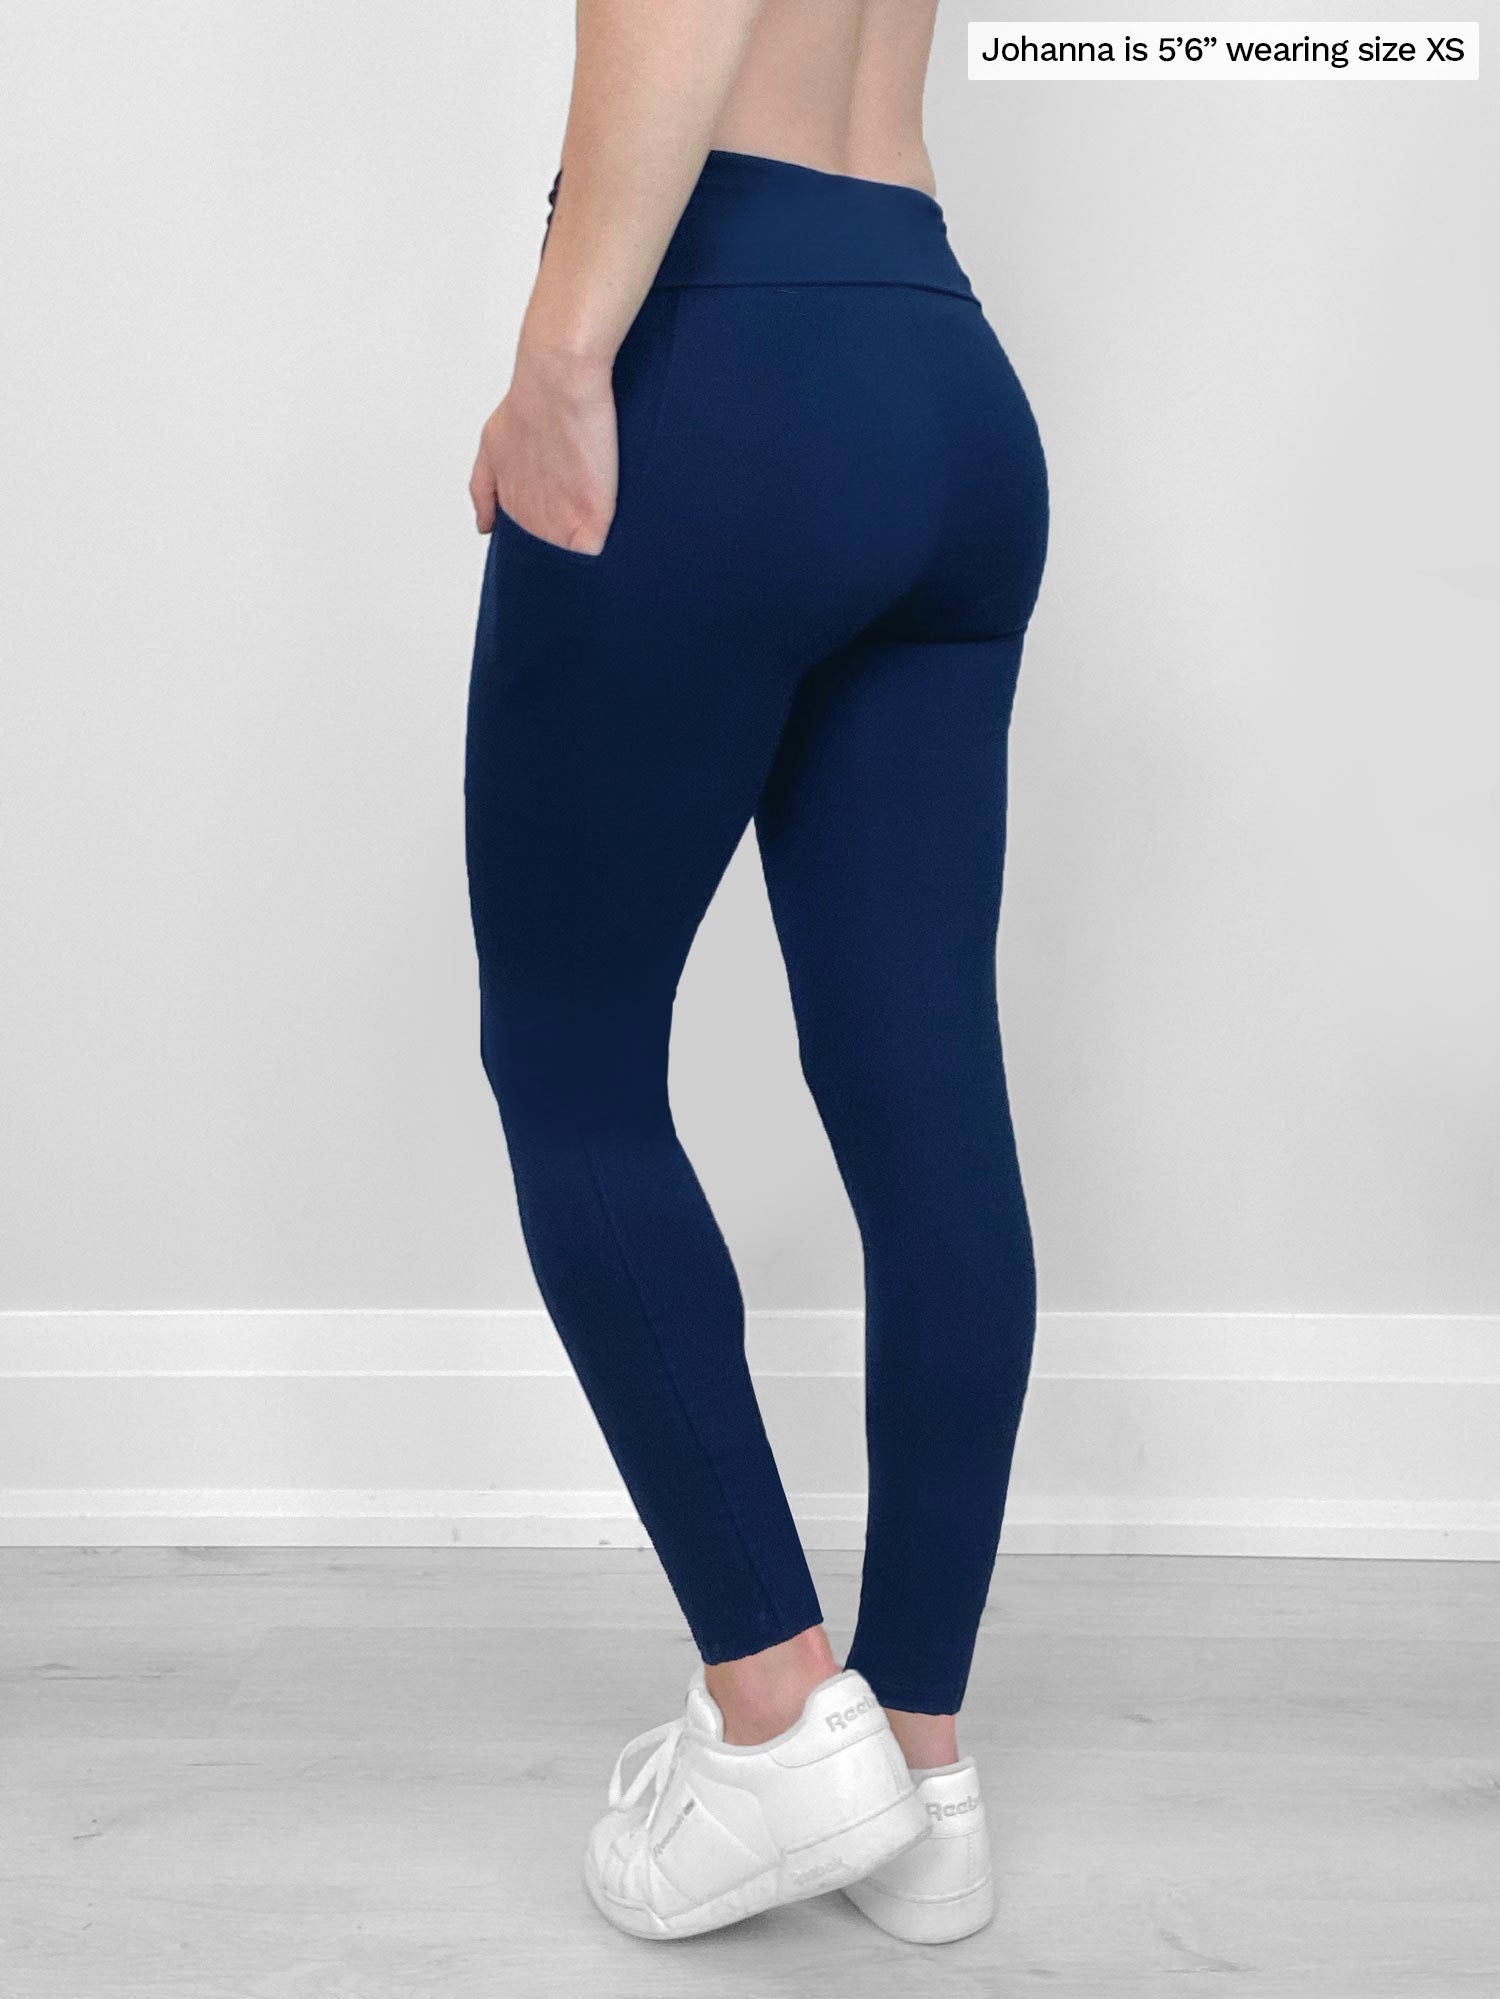 Overstock Deals Yoga Pants Tall Leggings 34 Inseam Womens Walking Pants  Womens Dress Pants Stretchy Yoga Pants Flare Deals of The Day Lightning  Deals Pants for Women Trendy Cross Front Leggings at